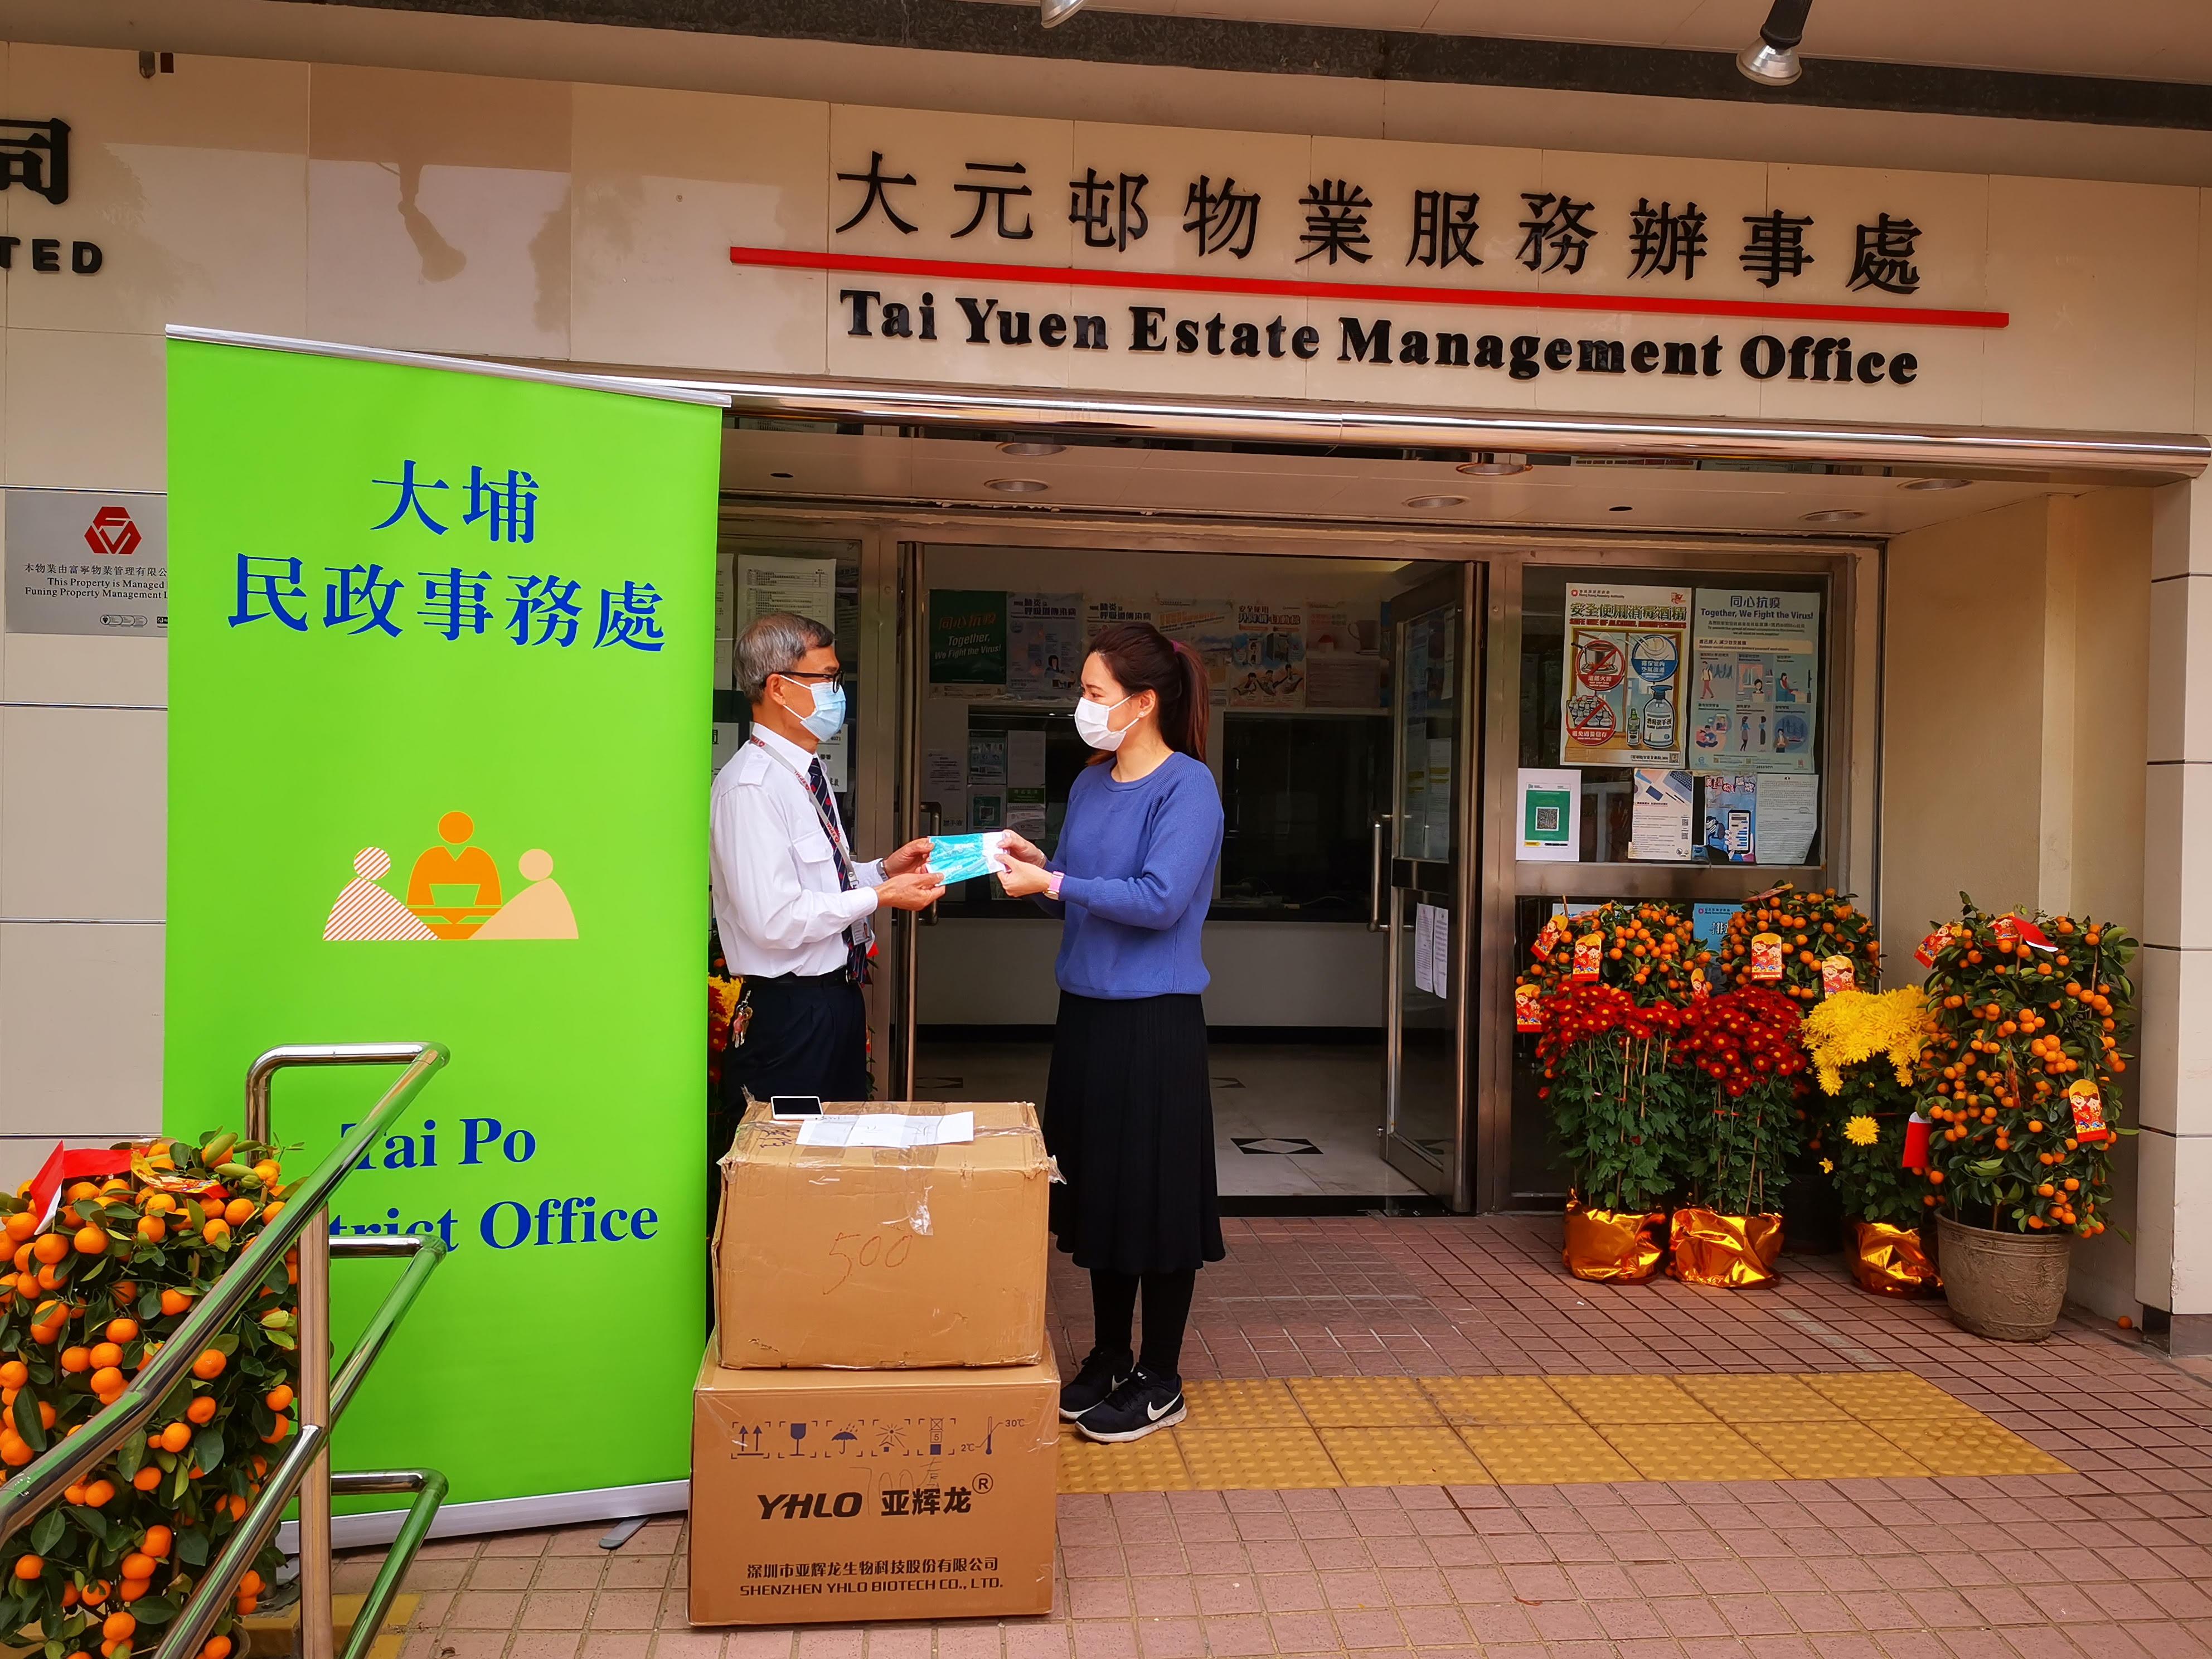 The Tai Po District Office today (February 6) distributed COVID-19 rapid test kits to households, cleansing workers and property management staff for voluntary testing through the property management companies of housing estates and buildings in the district.